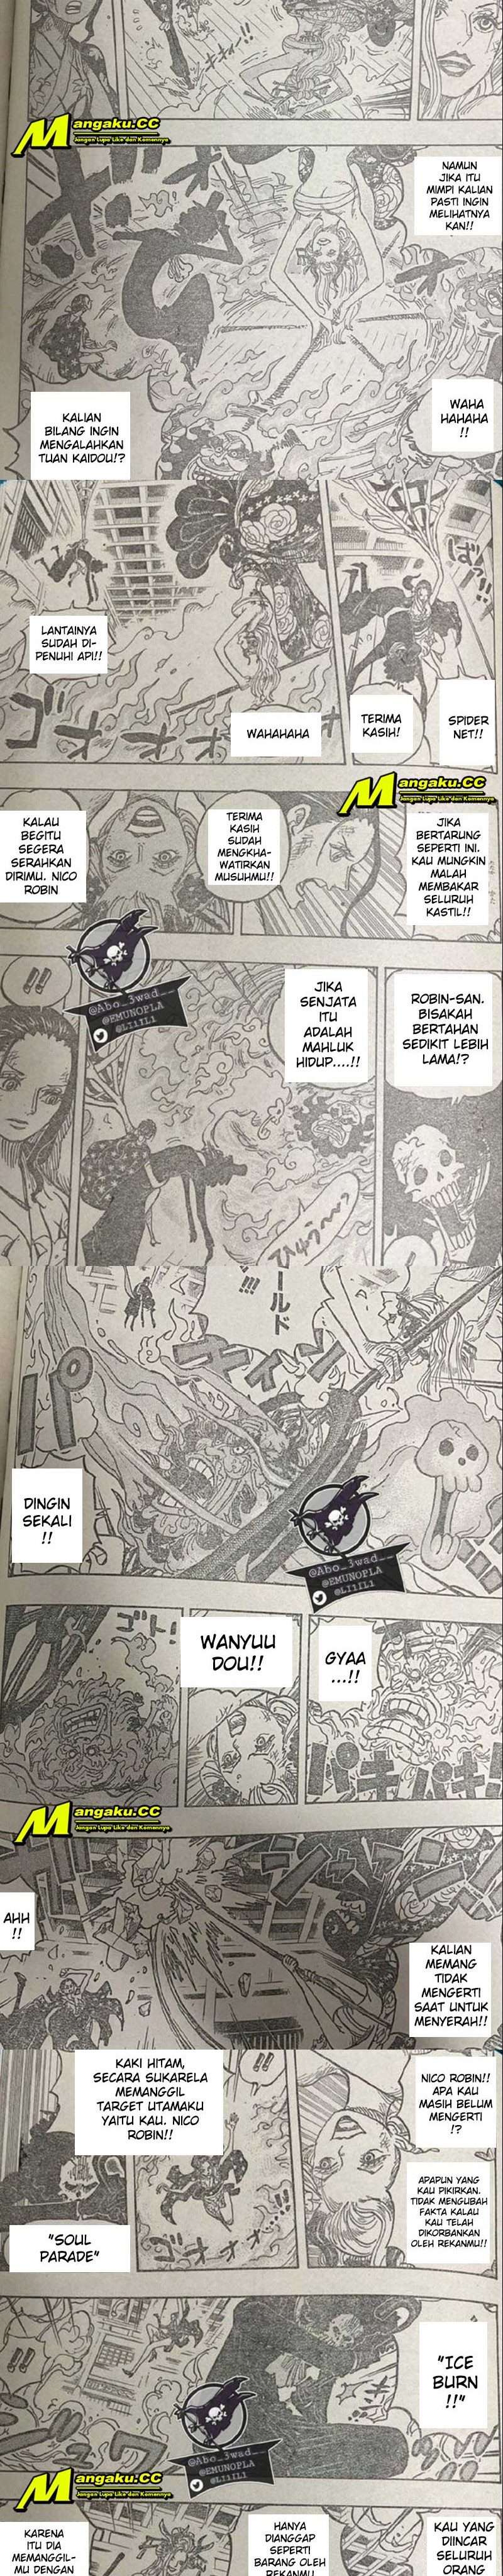 One Piece Chapter 1020 LQ Image 3